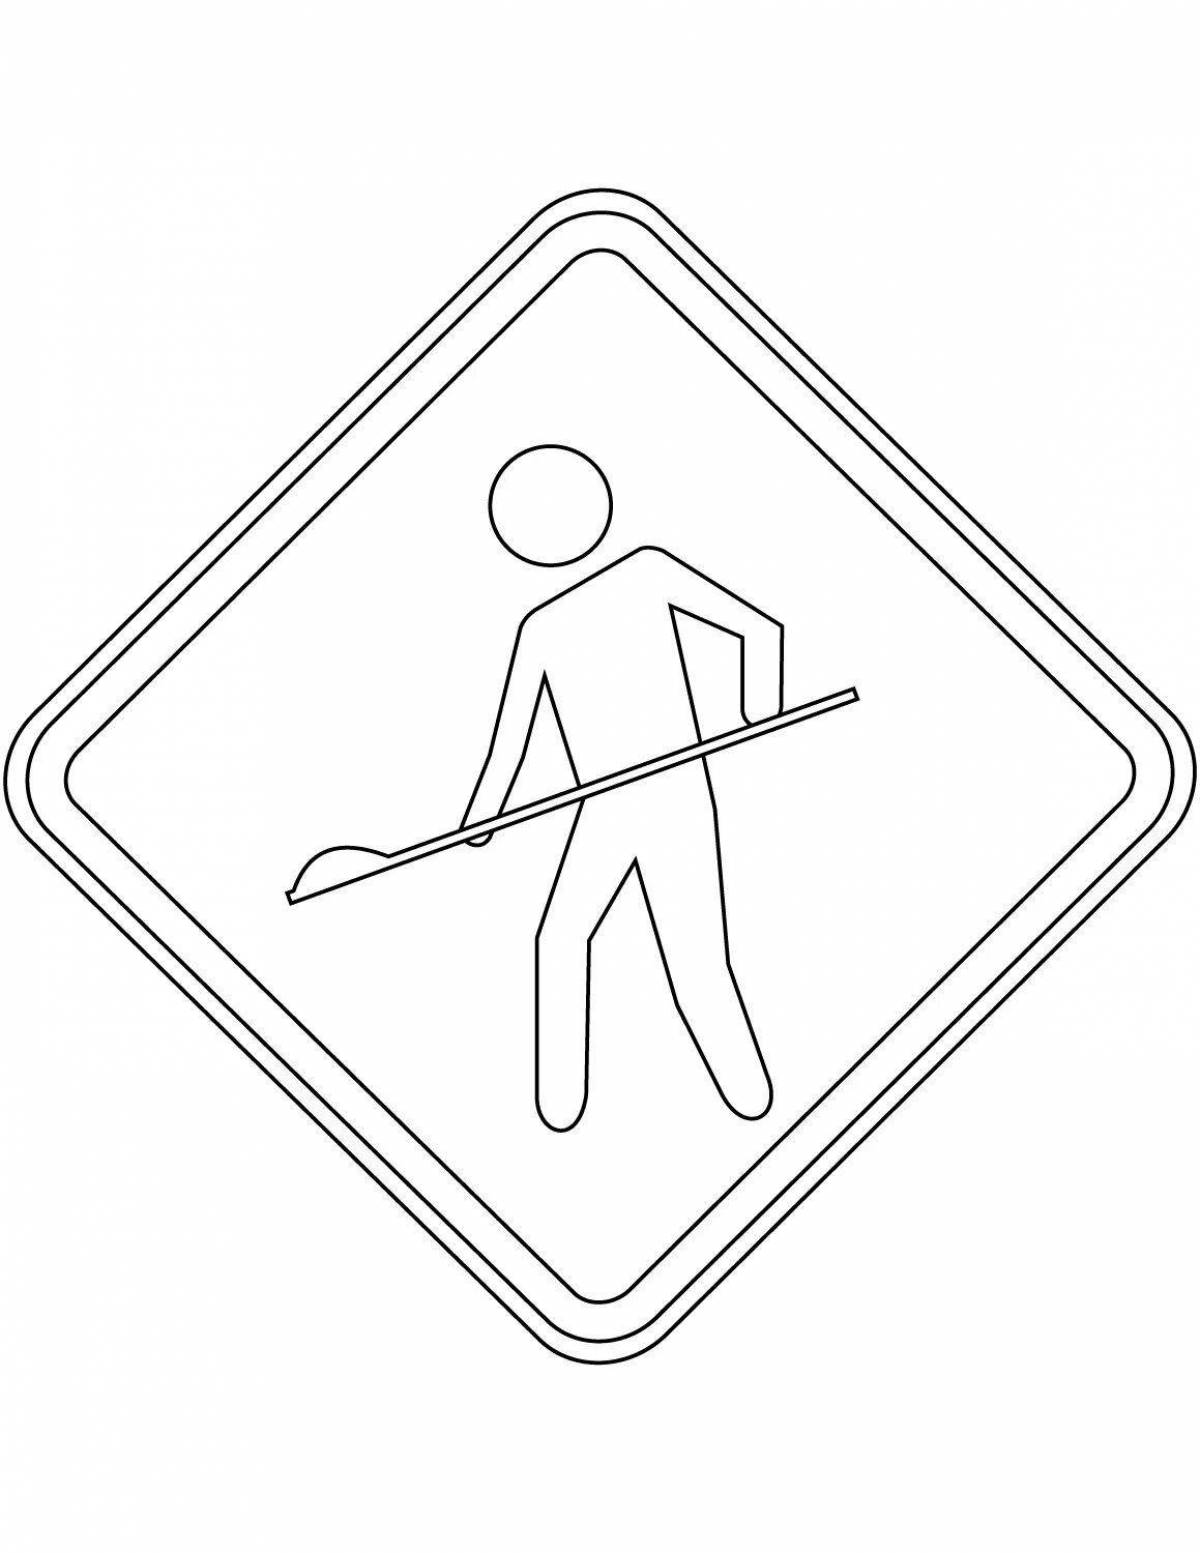 Coloring page magic overpass sign